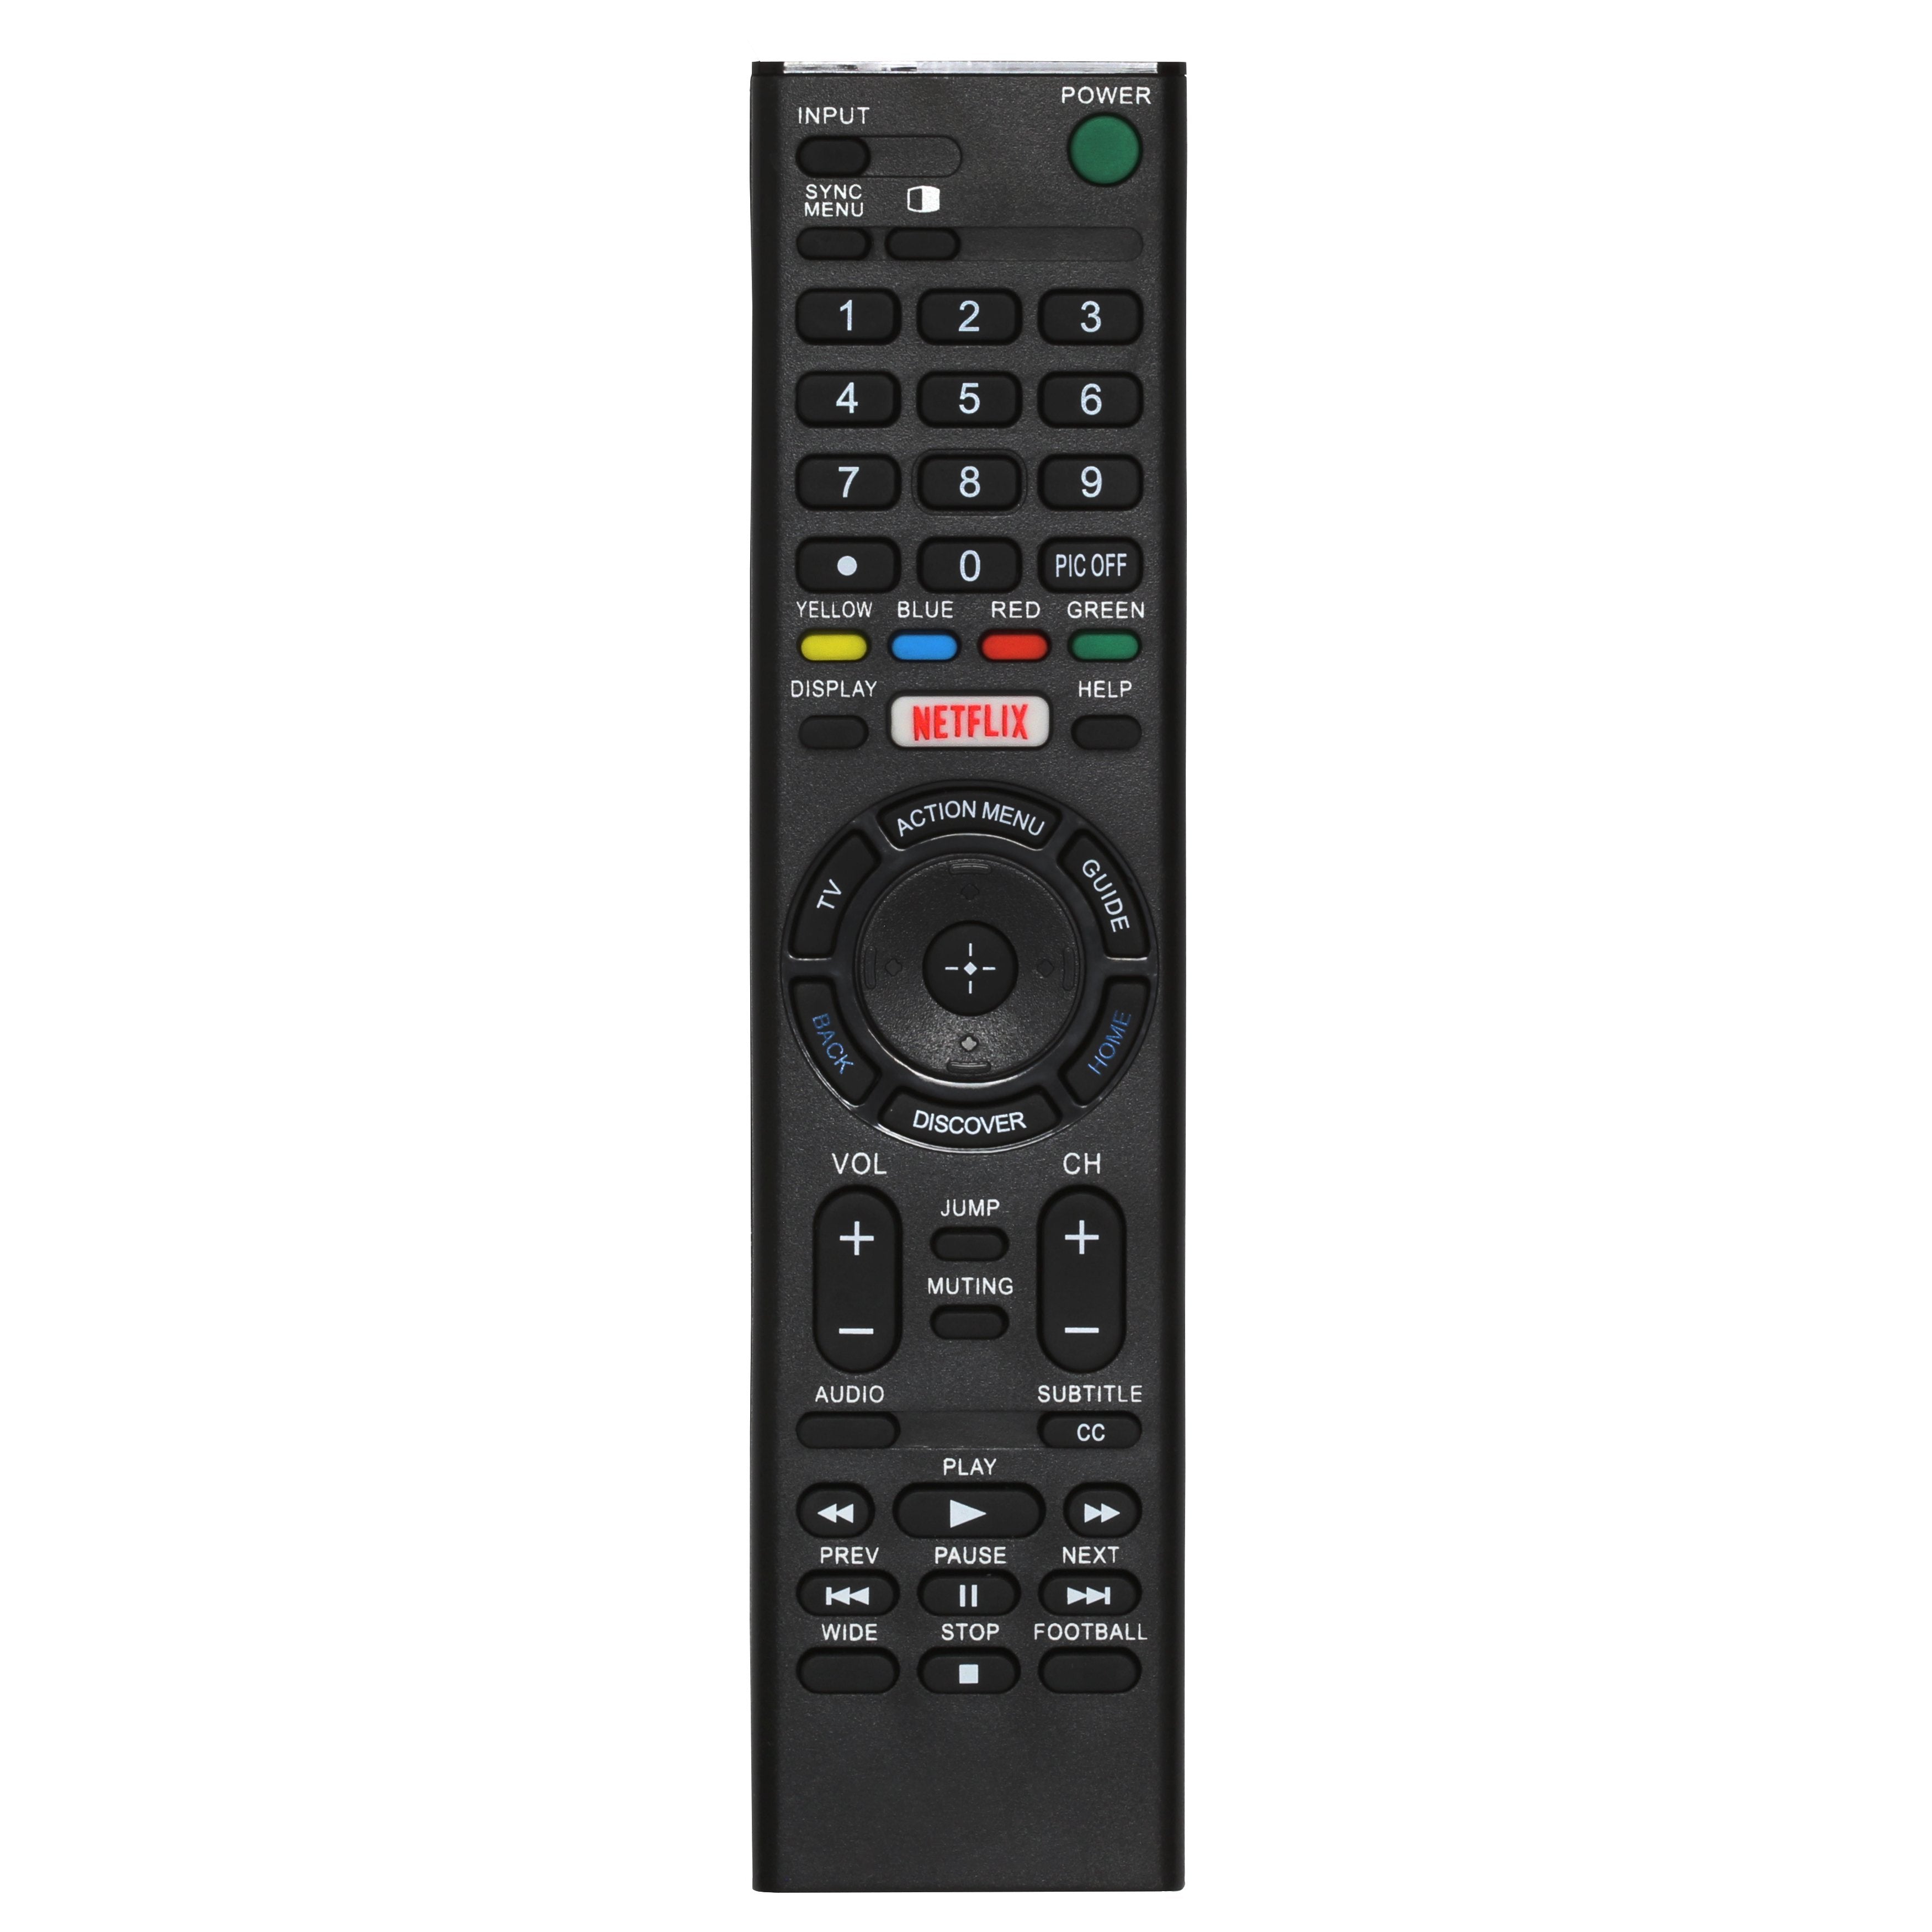 Sony KE50XBR900 Replacement TV Remote Control